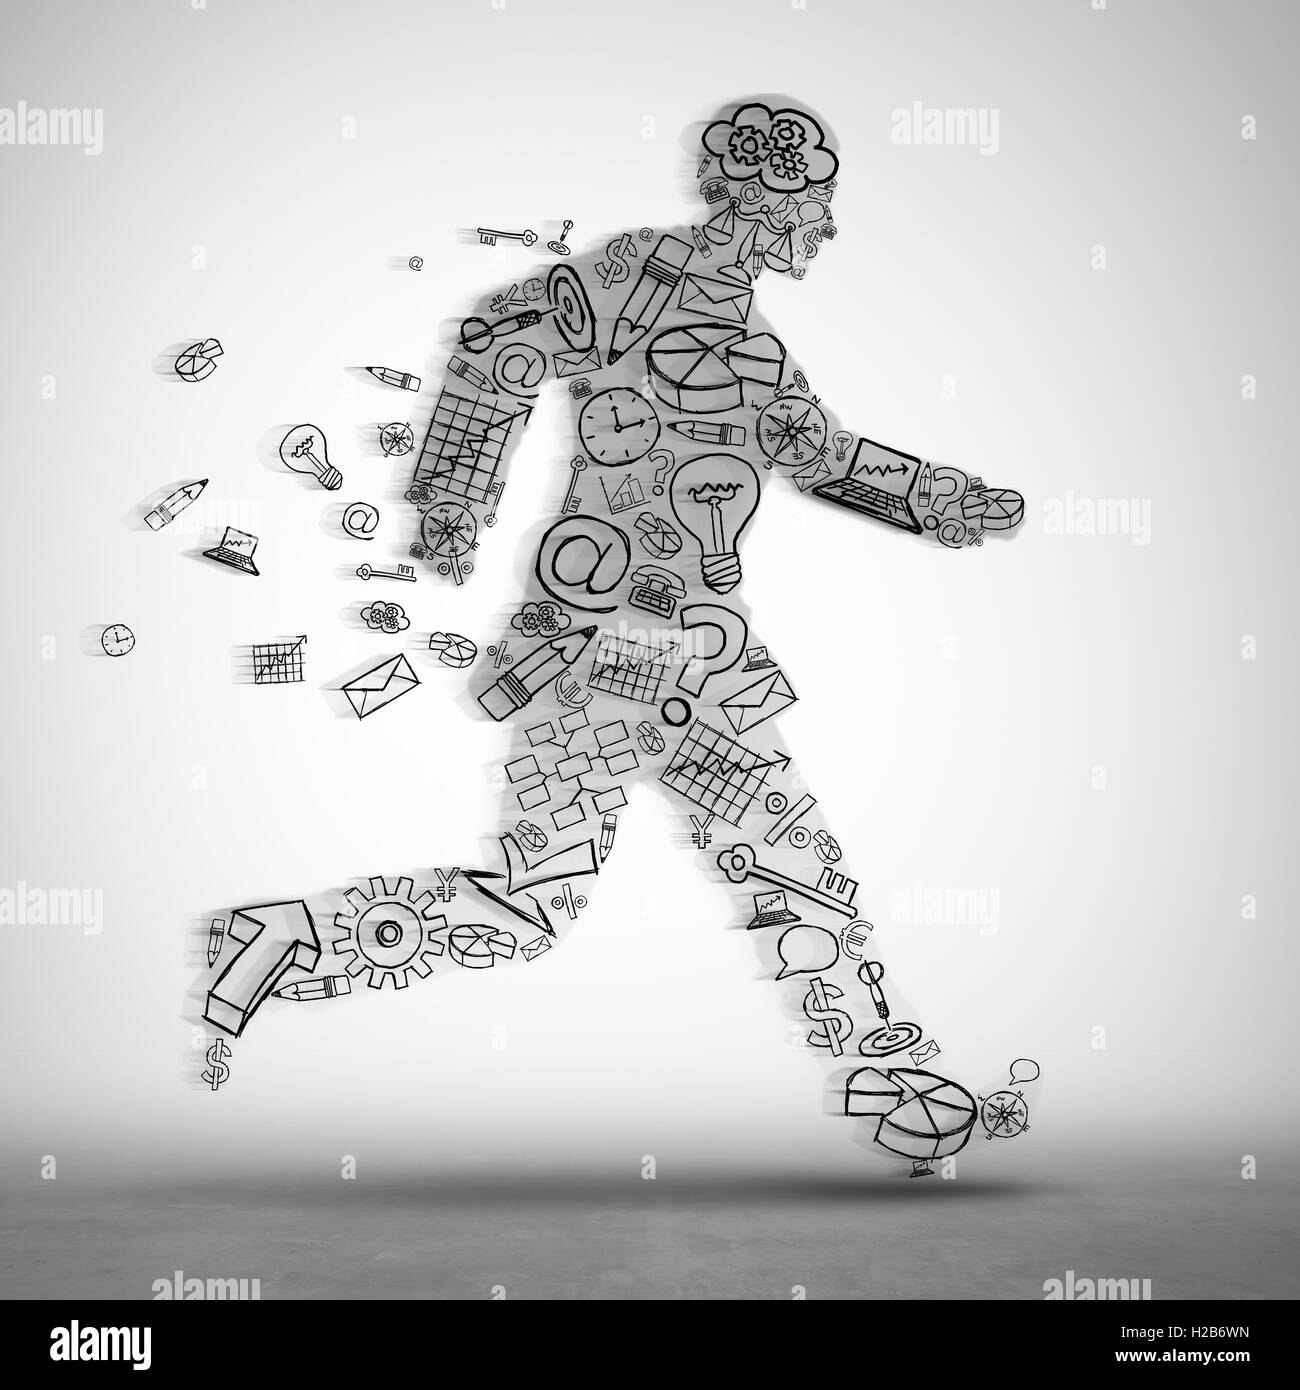 Business on the move concept as a group of corporate icons shaped as a businessman runner as a metaphor for forward career ambition or employee direction in a 3D illustration style. Stock Photo